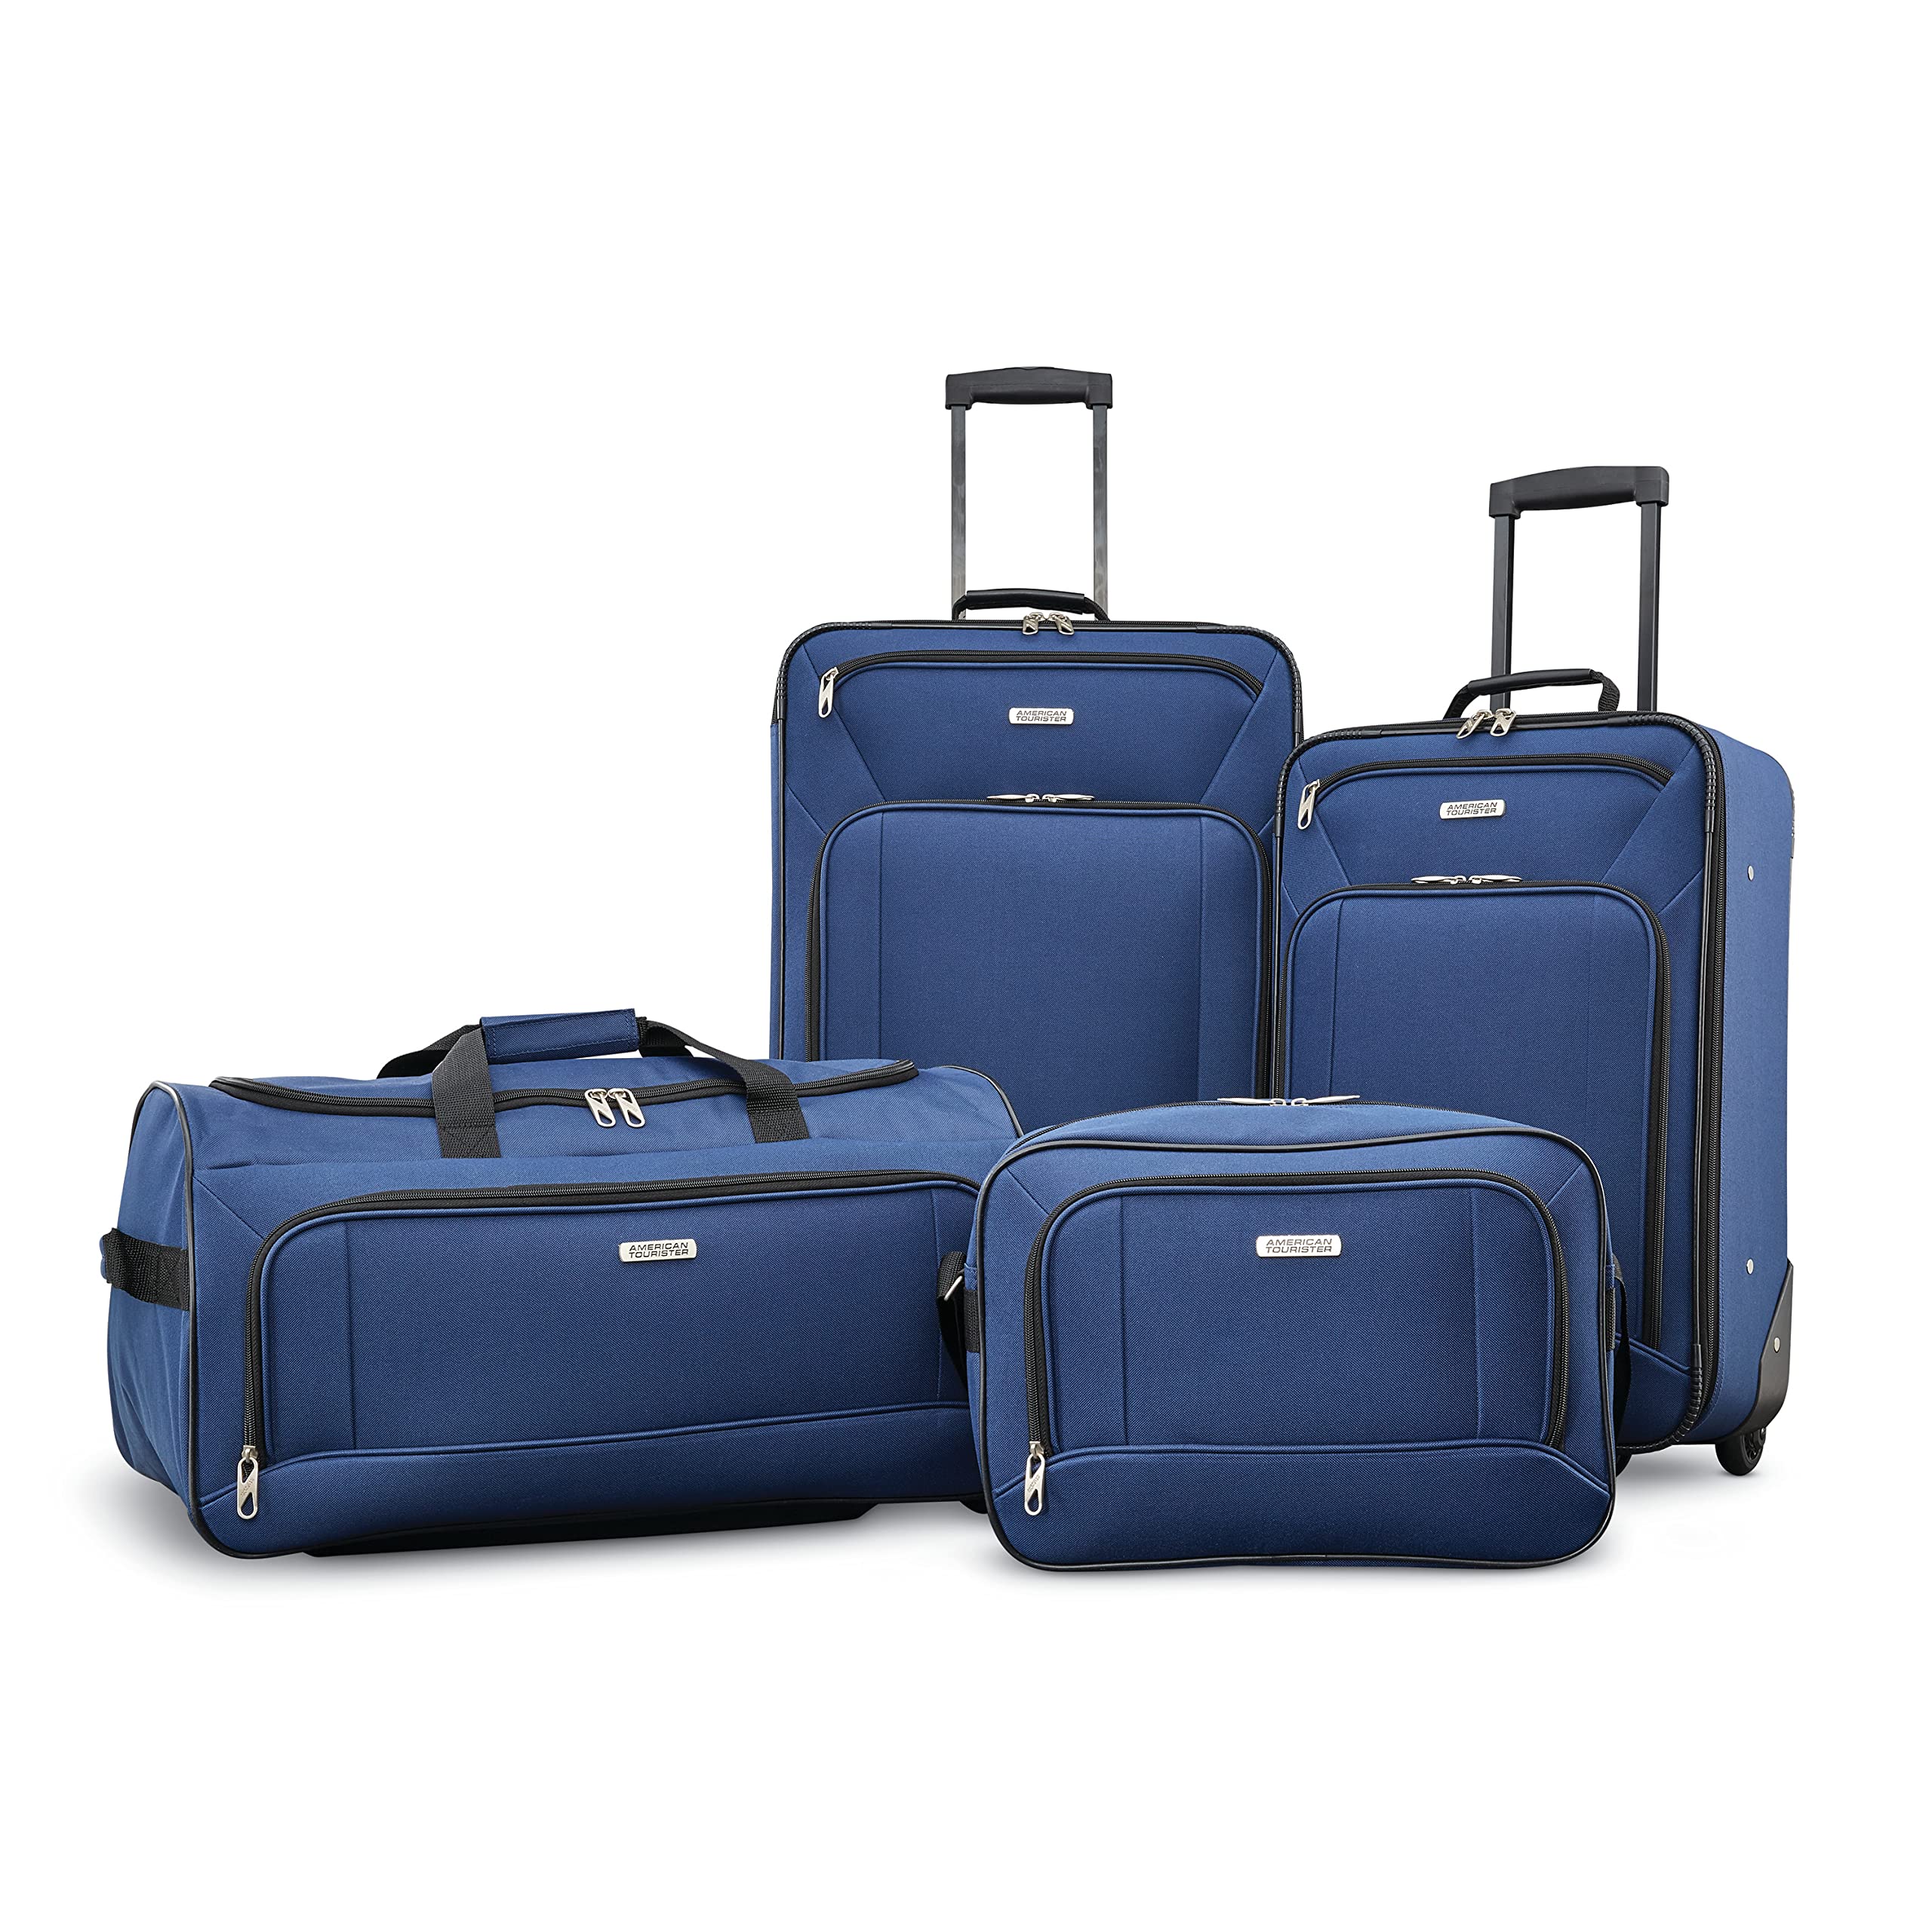 4-Piece American Tourister Fieldbrook XLT Softside Upright Luggage (Navy) $64.41 + Free Shipping